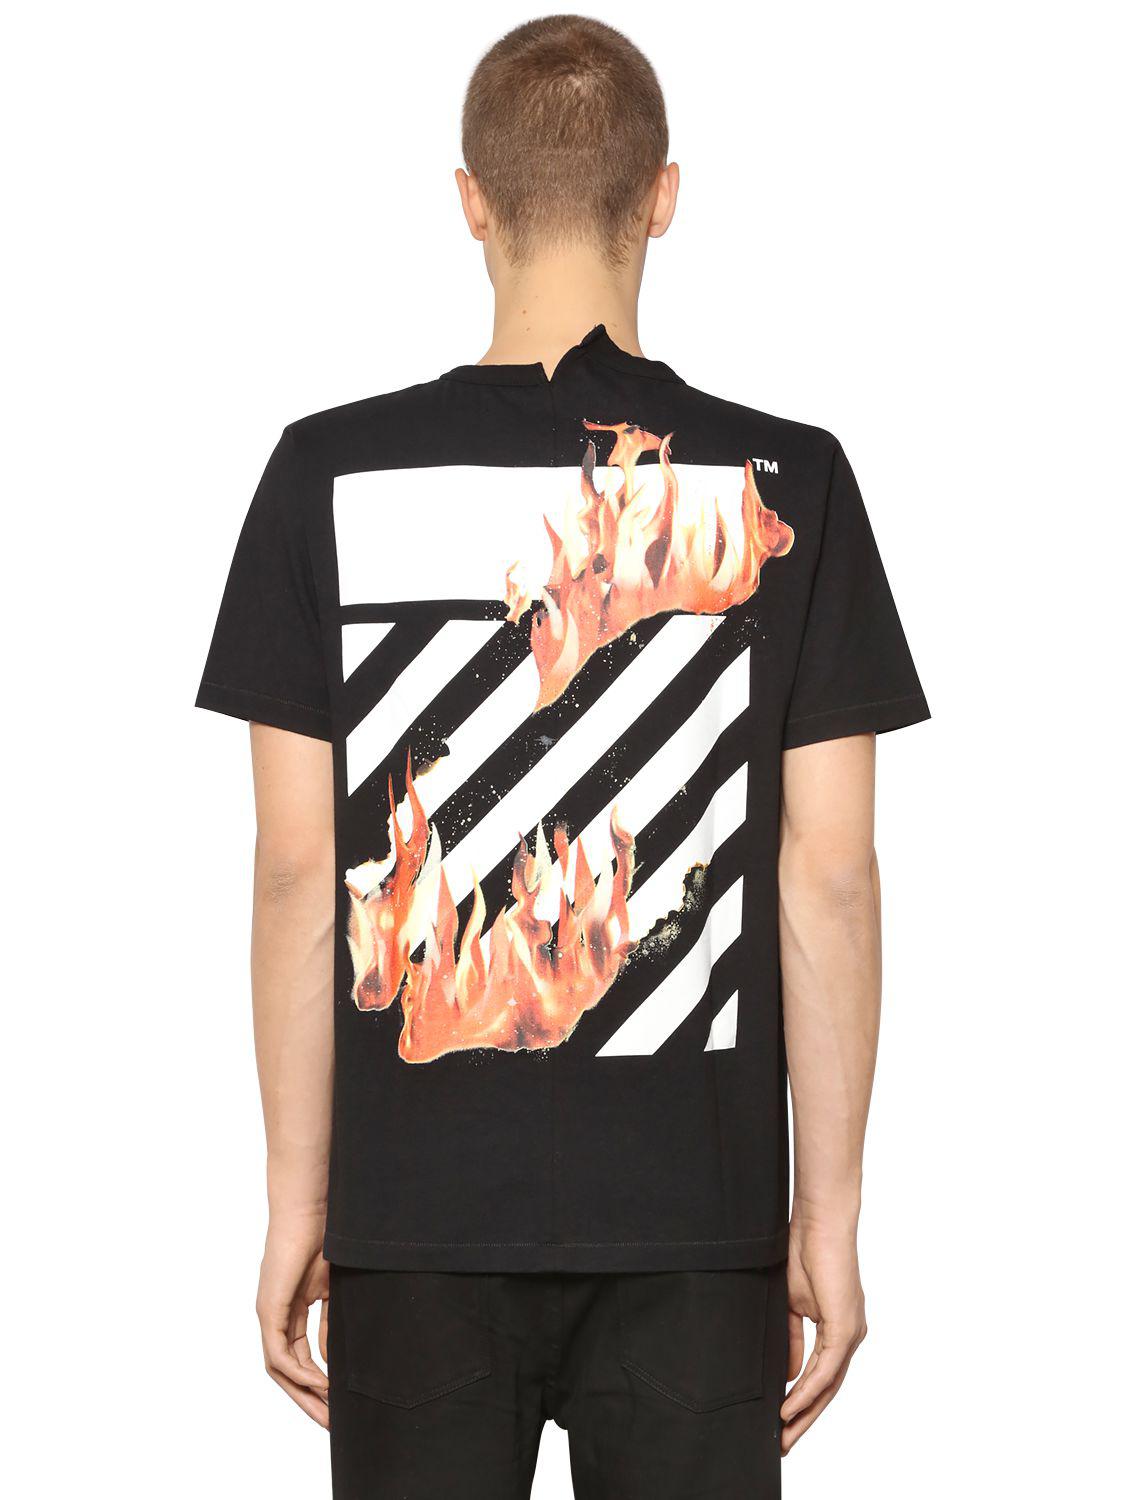 Image result for off white flame